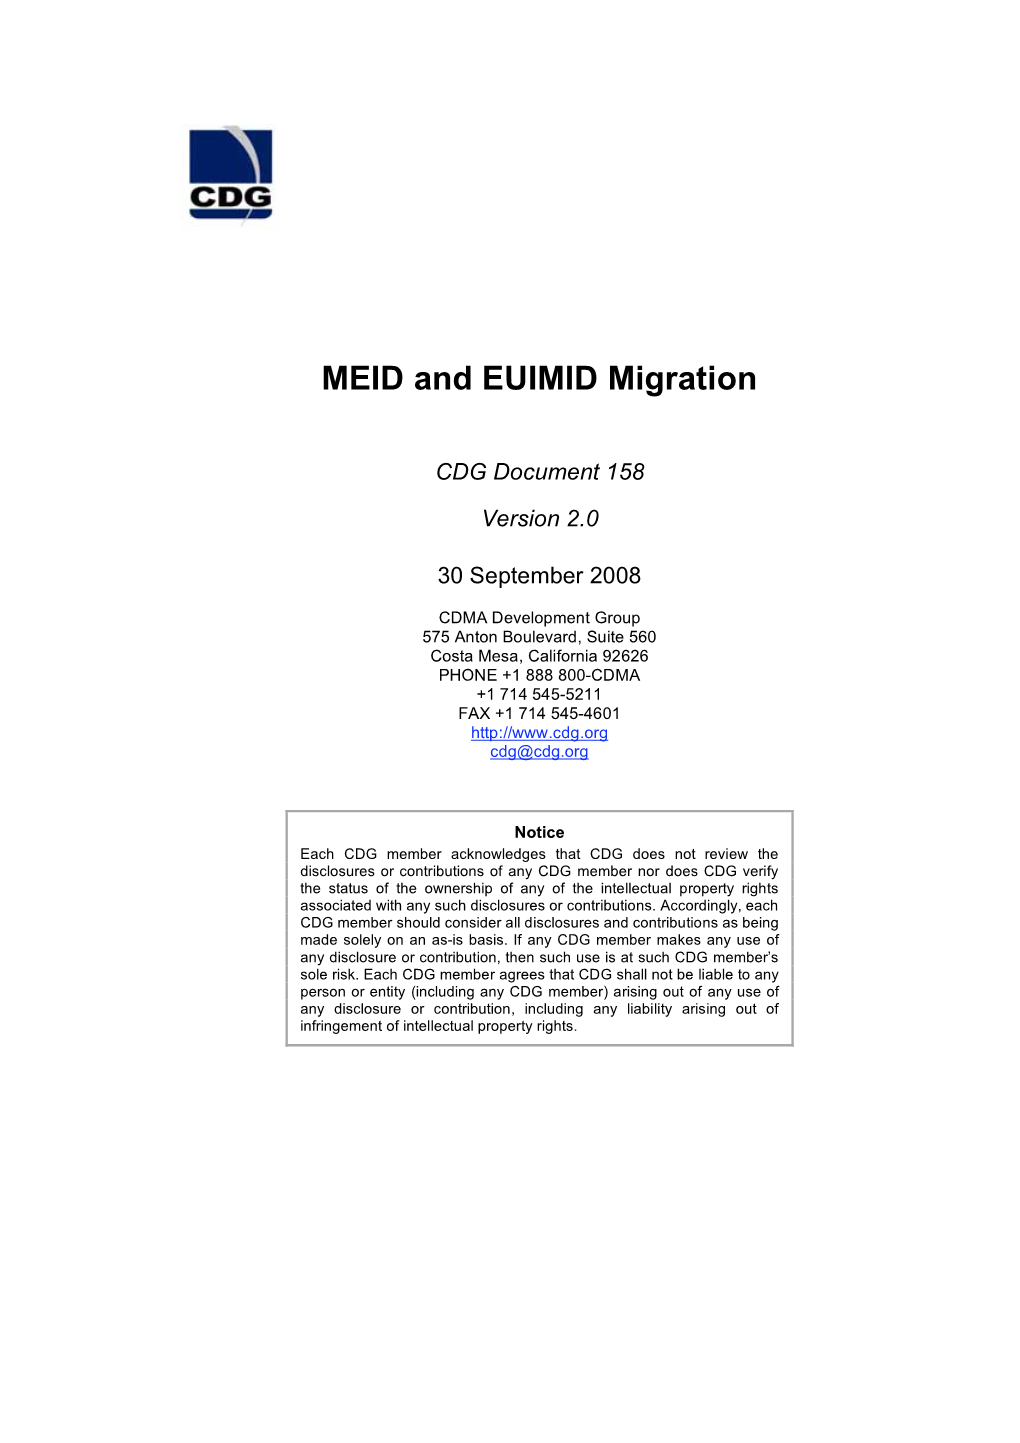 MEID and EUIMID Migration